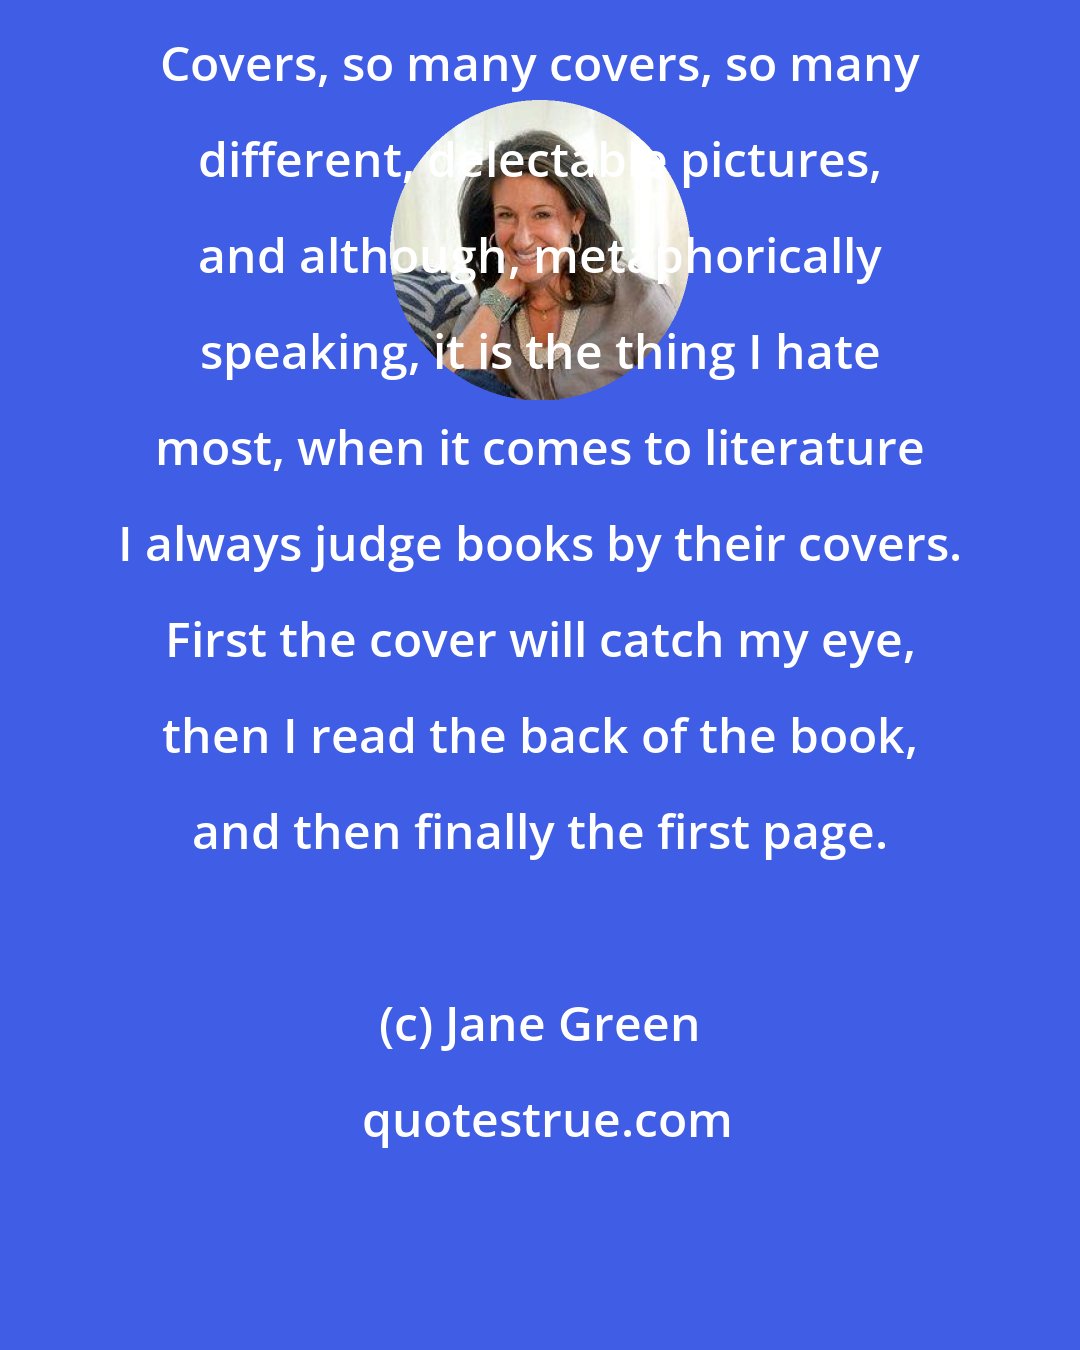 Jane Green: Covers, so many covers, so many different, delectable pictures, and although, metaphorically speaking, it is the thing I hate most, when it comes to literature I always judge books by their covers. First the cover will catch my eye, then I read the back of the book, and then finally the first page.